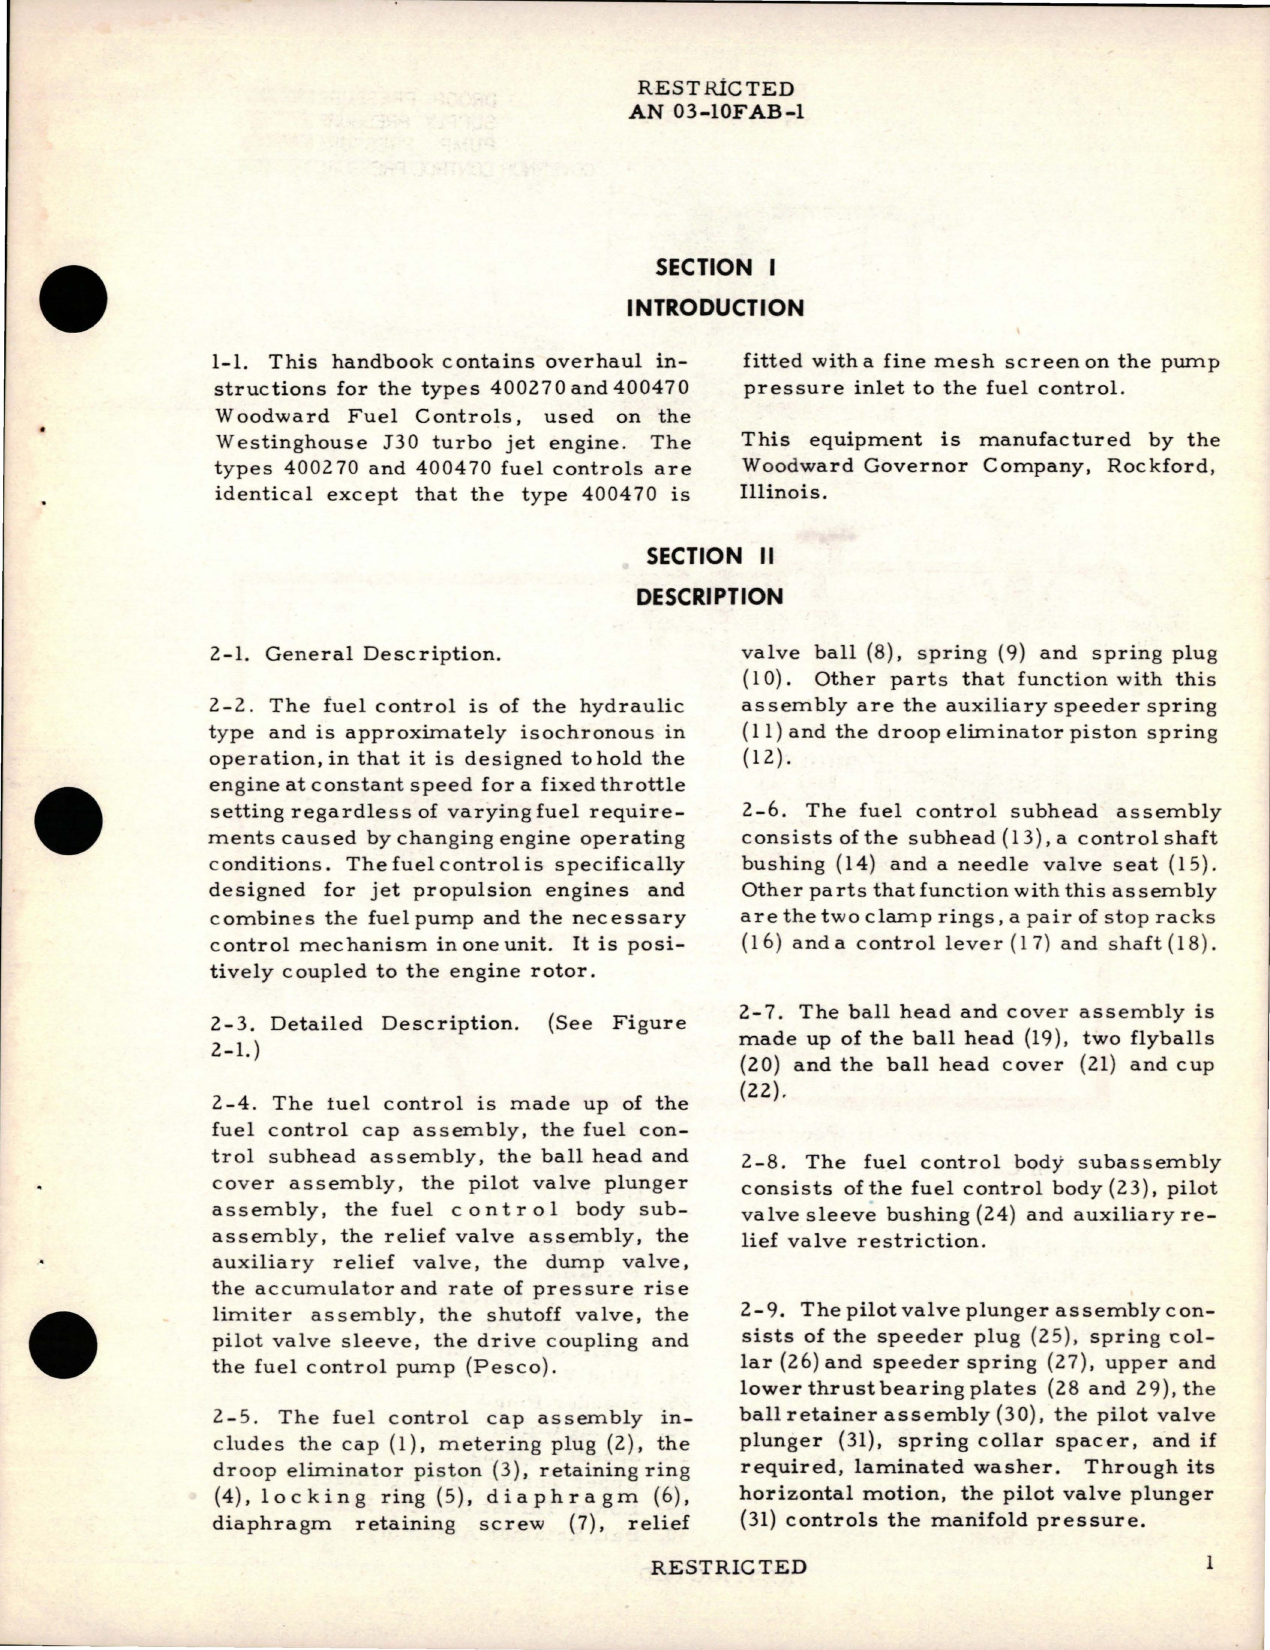 Sample page 5 from AirCorps Library document: Overhaul Instructions for Fuel Control - Models 400270, 400470